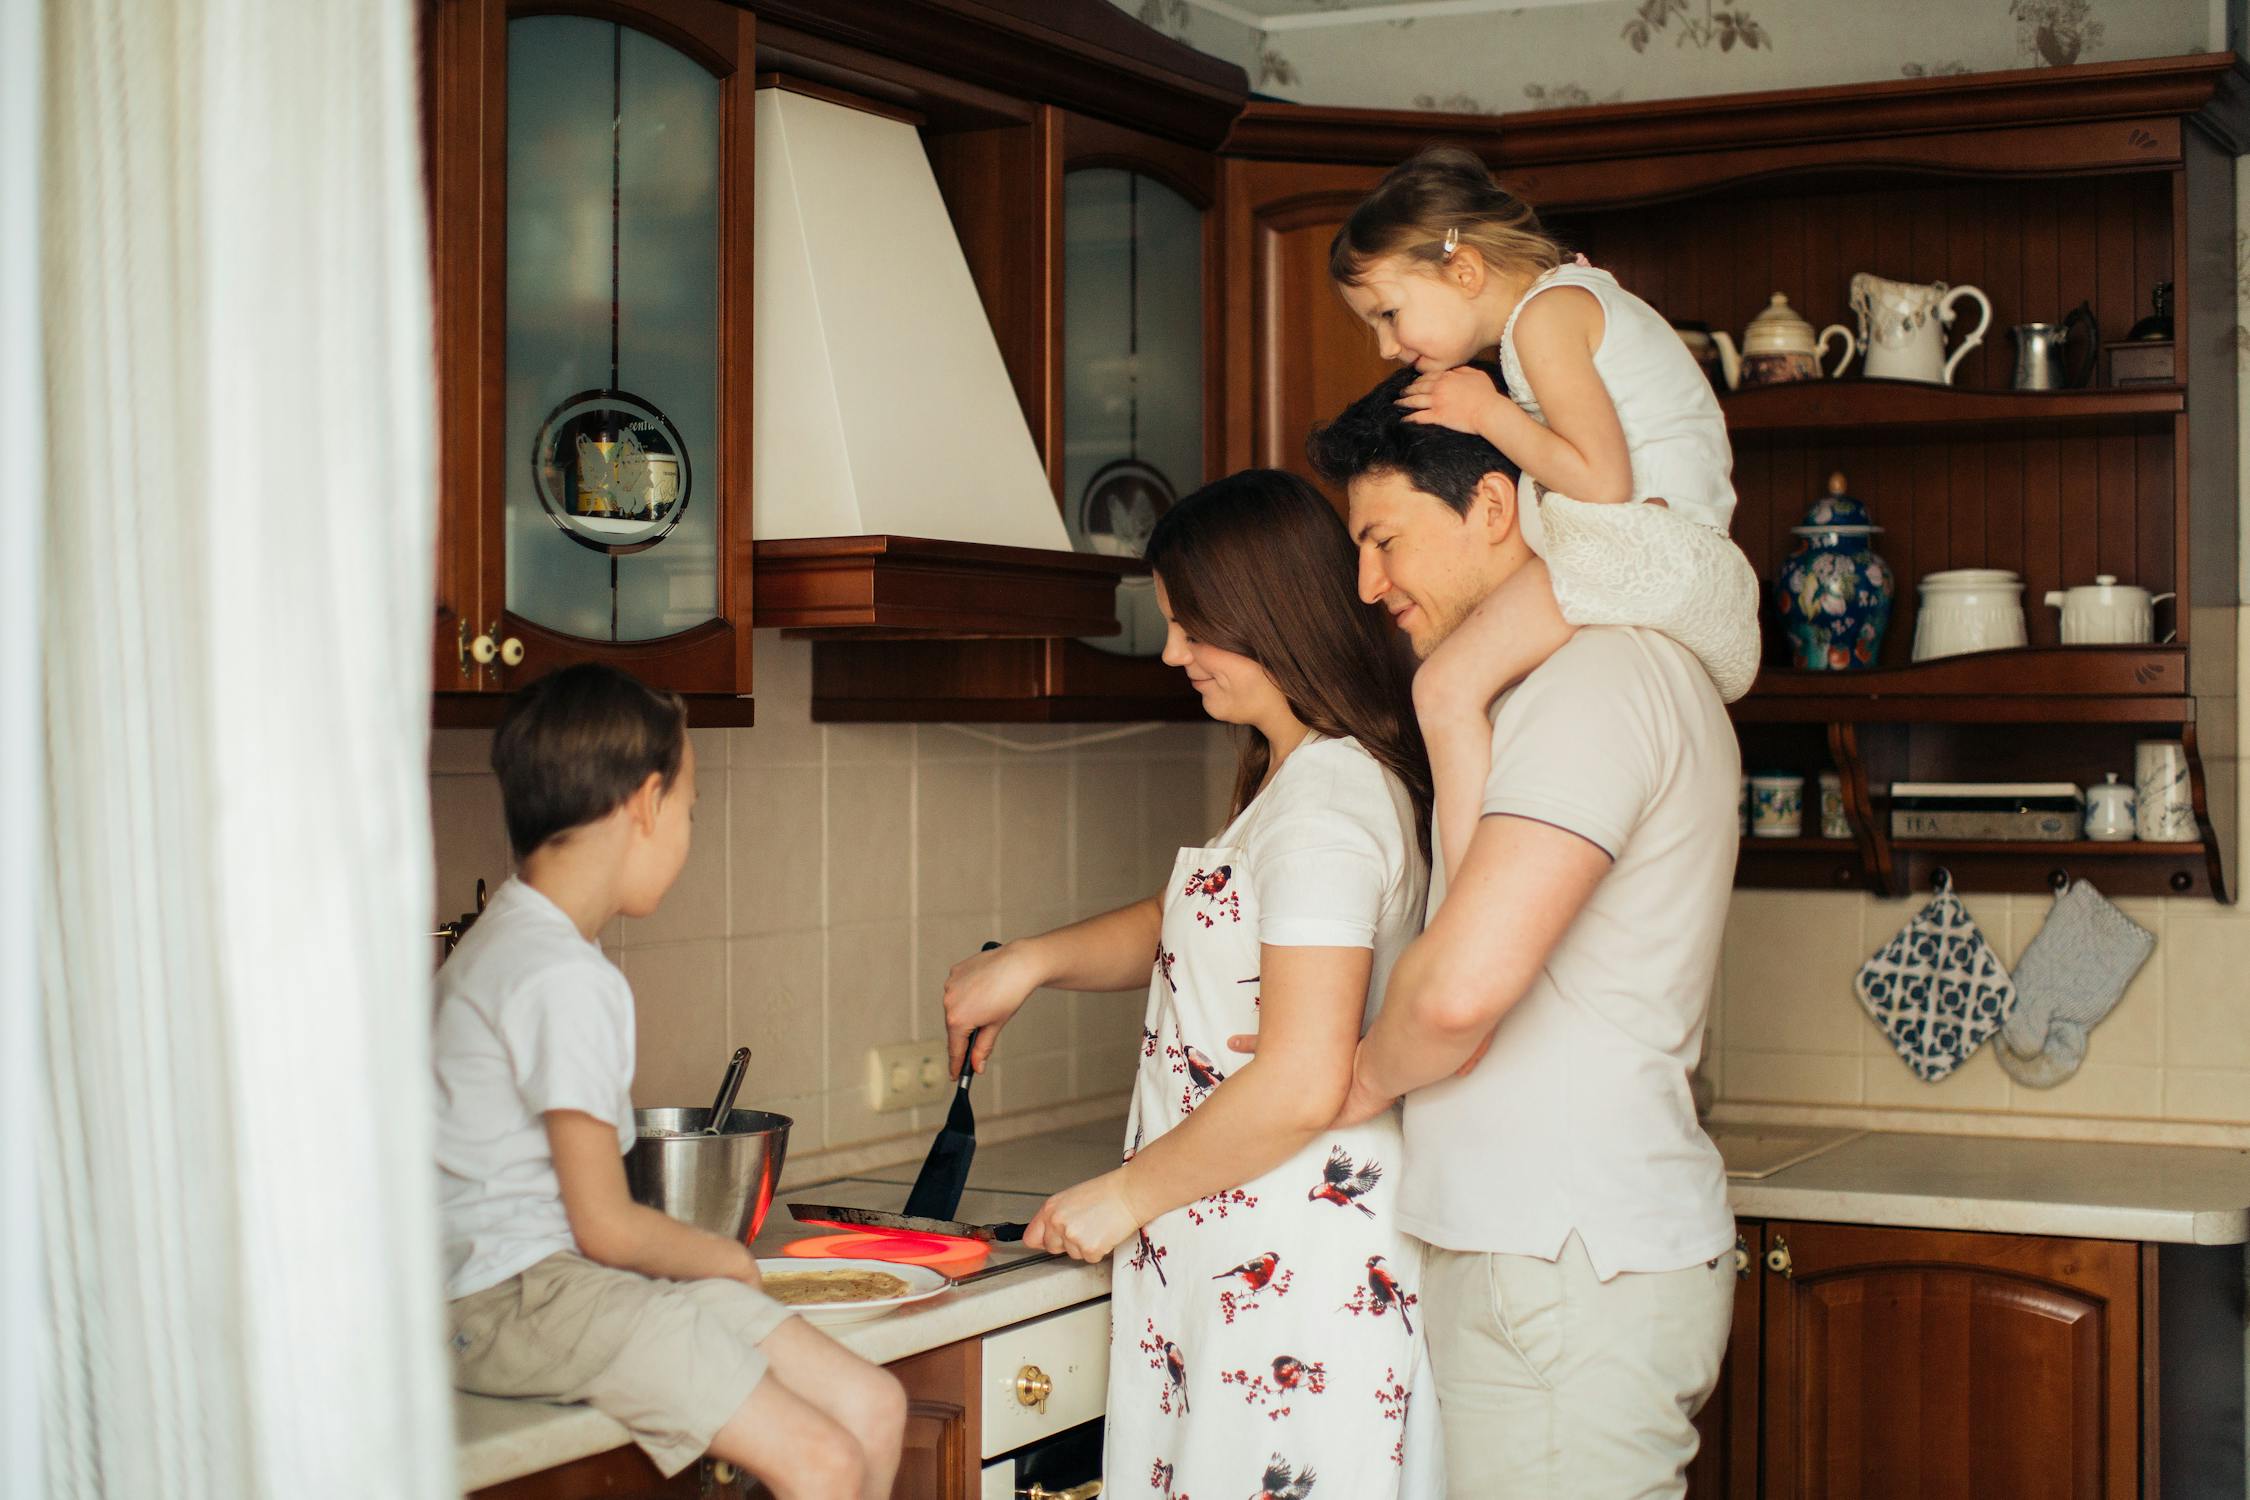 Family of four making pancakes in the kitchen.